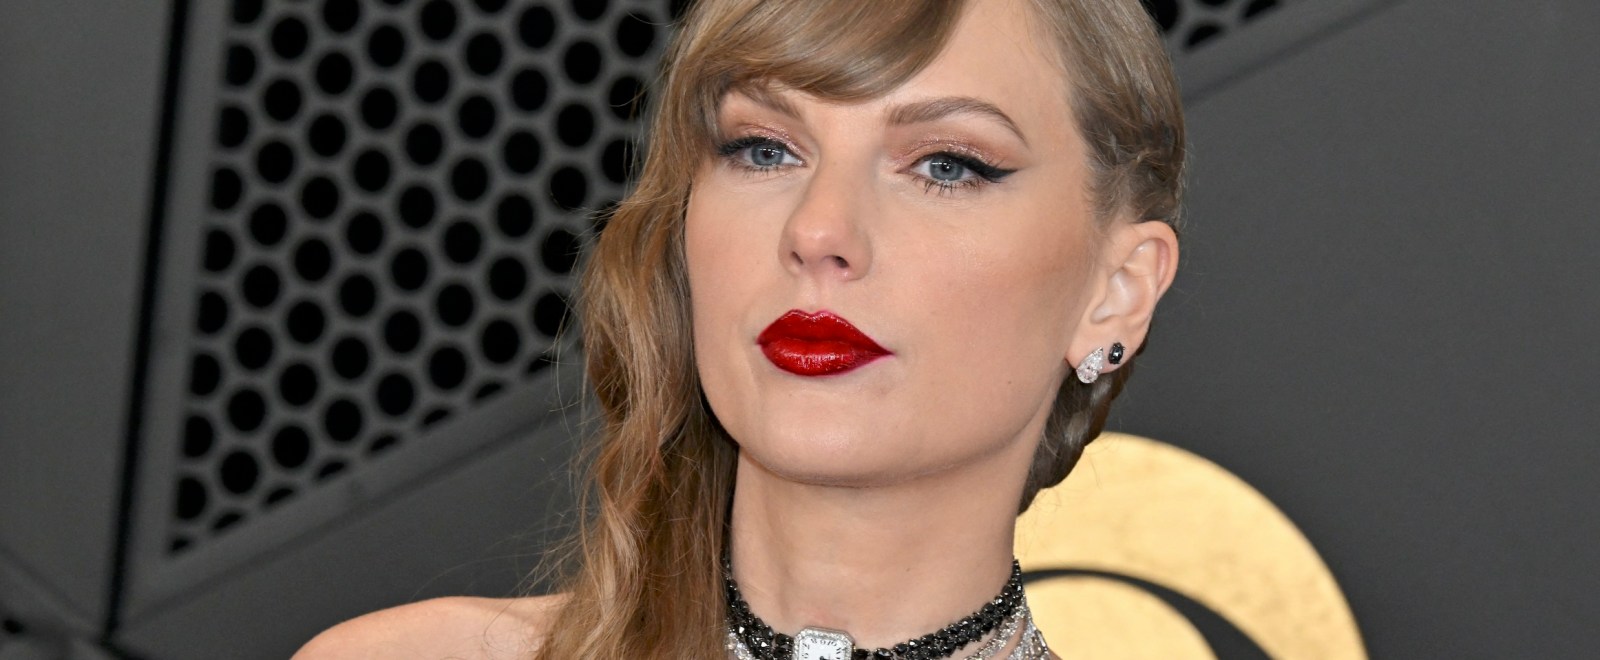 Taylor Swift Sets the Clock to Midnight With a Trendy Watch Choker